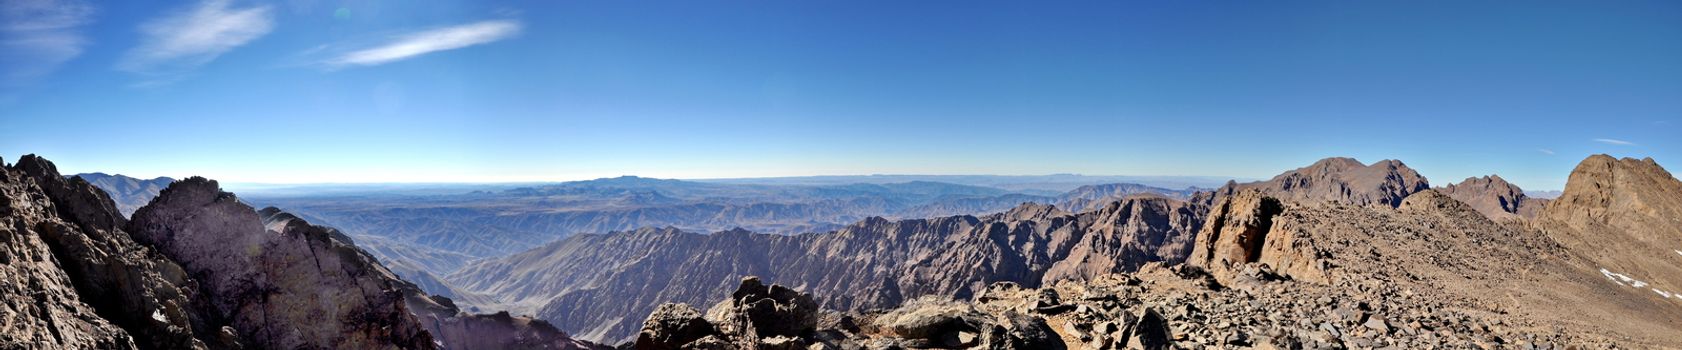 Panoramic view from Mount Toubkal (4,167 metres), Morocco